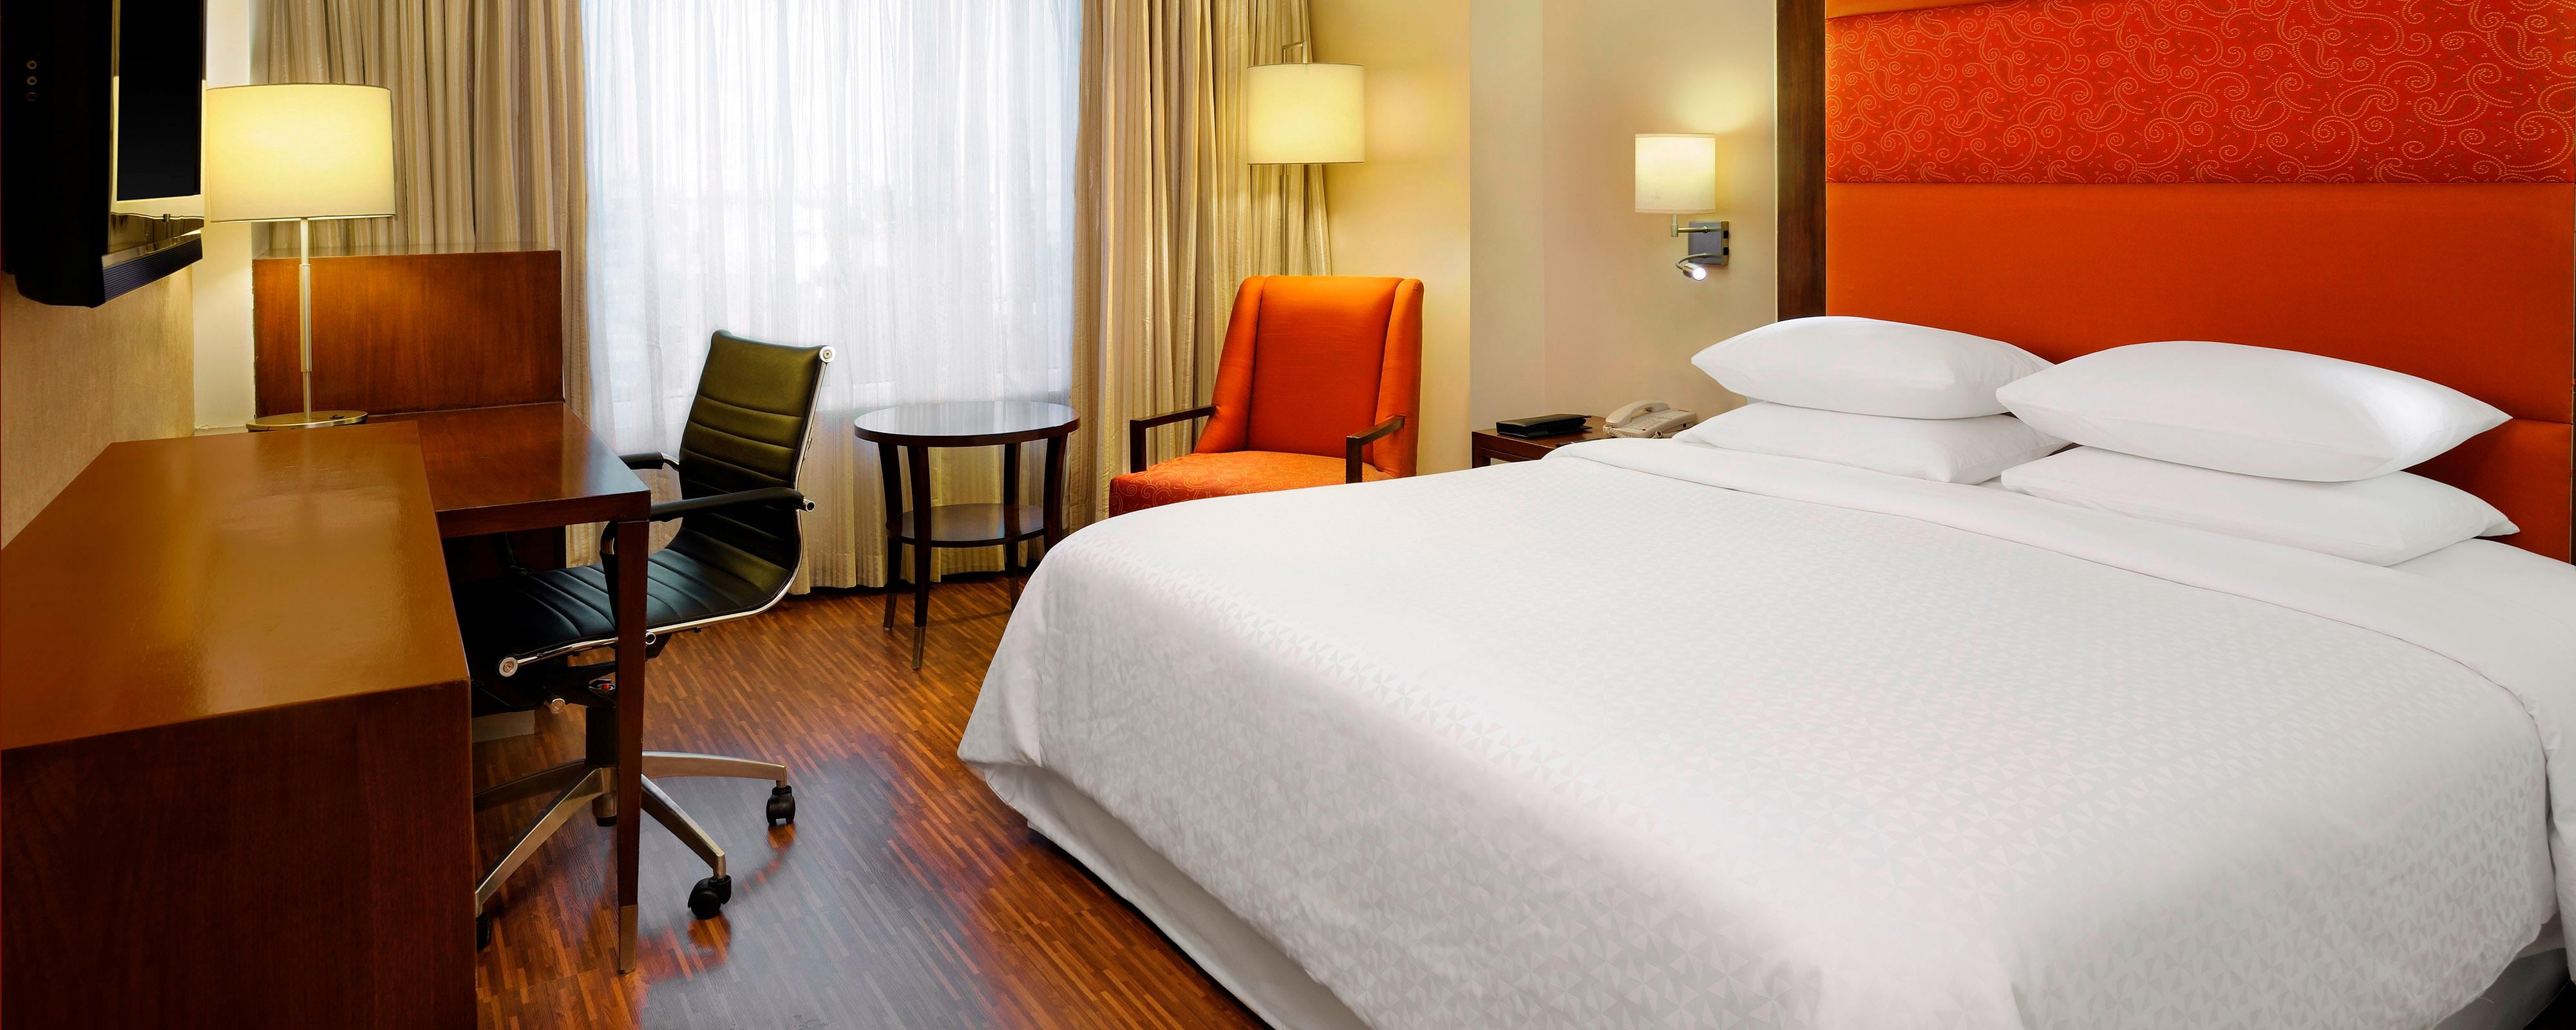 Ahmedabad, India, Hotel Rooms | Four Points by Sheraton Ahmedabad